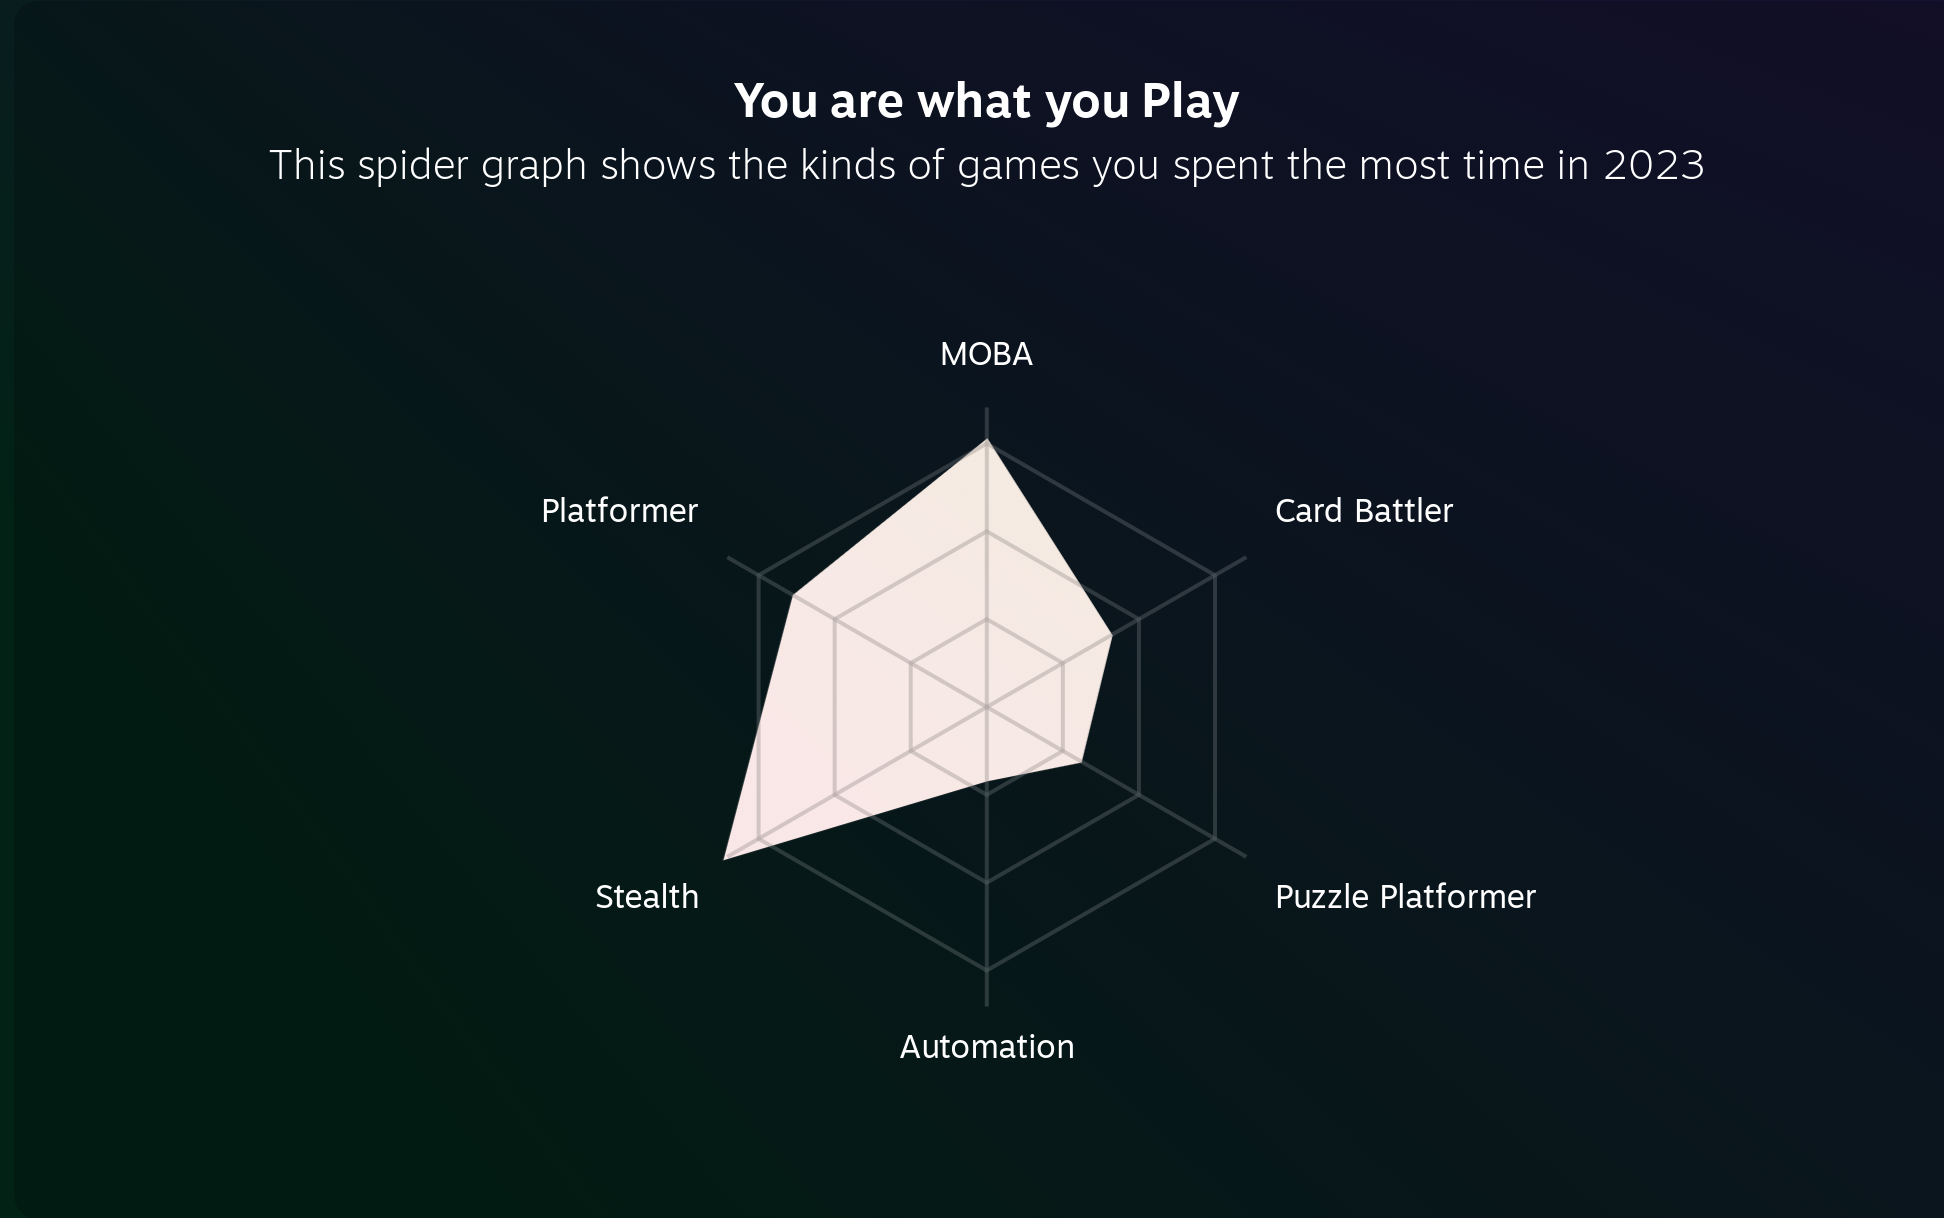 This spider graph shows the kinds of games you spent the most time in 2023. MOBA, 3; Card Battler, 1.7; Puzzle Platformer, 1.3; Automation, 1; Stealth, 3.8; Platformer, 2.6